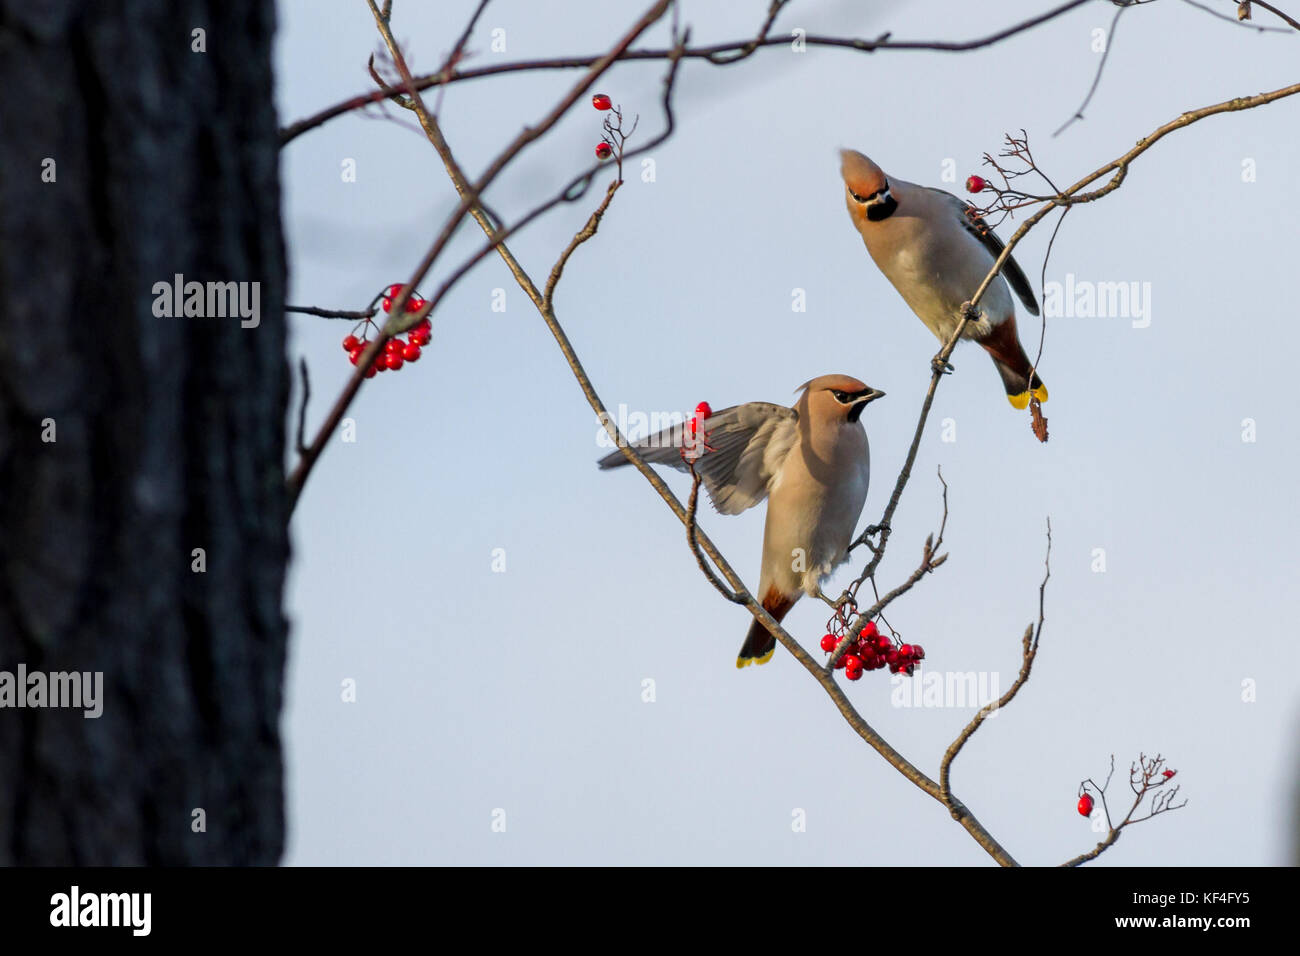 Finnish wildlife: a pair of waxwings (Bombycilla garrulus) in a rowan tree with red berries. Stock Photo